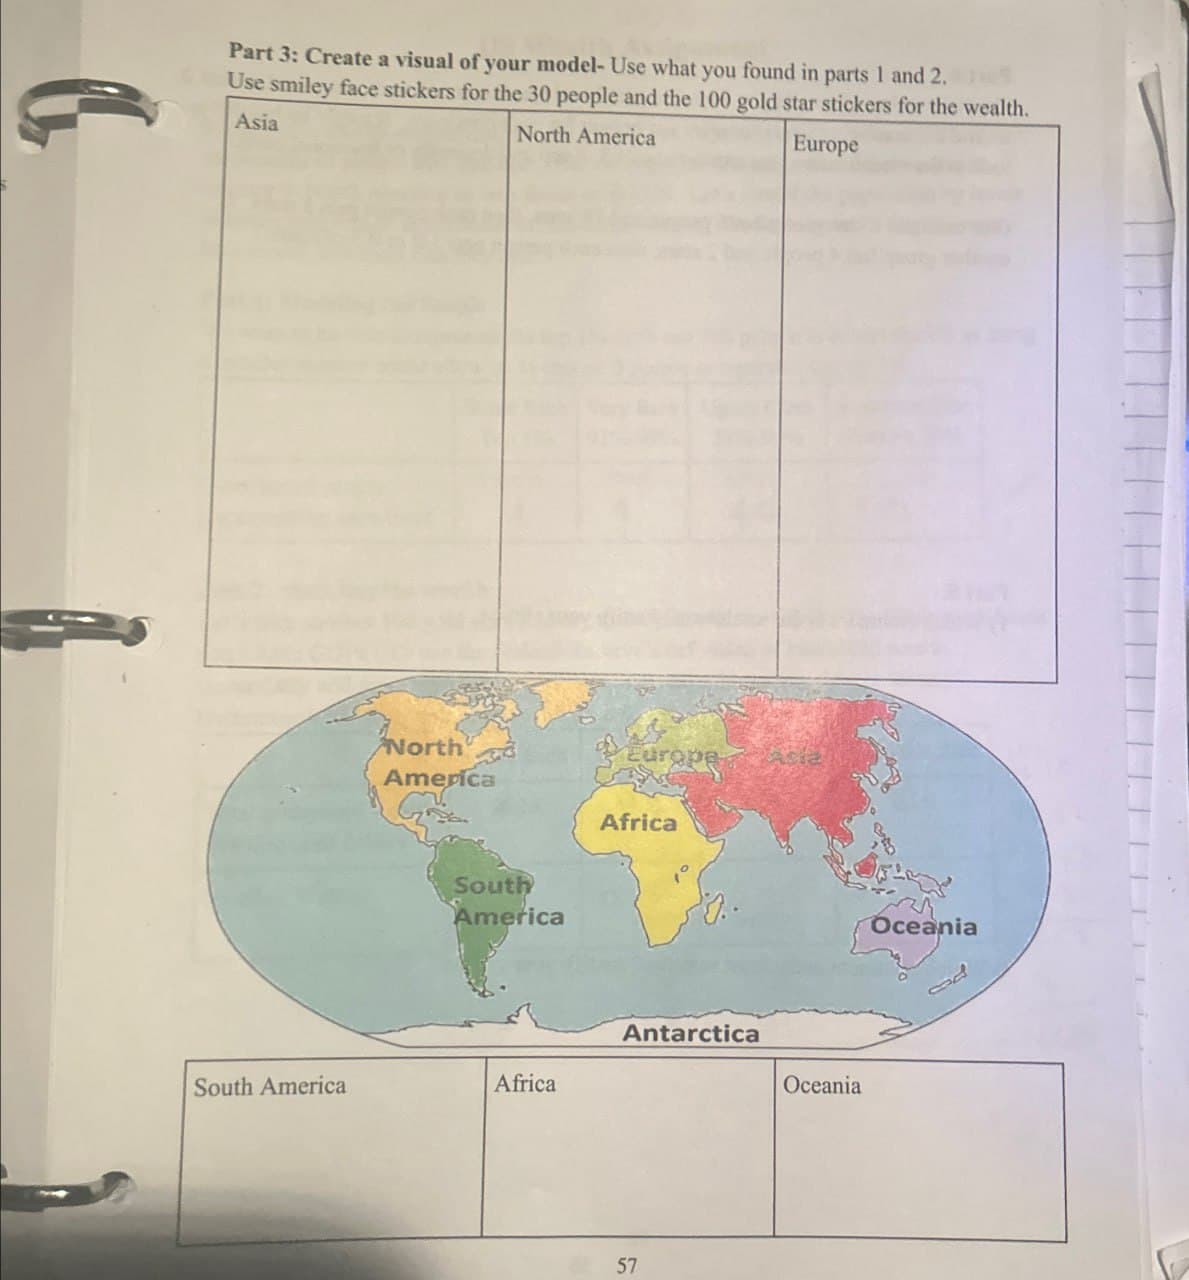 Part 3: Create a visual of your model- Use what you found in parts 1 and 2.
Use smiley face stickers for the 30 people and the 100 gold star stickers for the wealth.
Asia
North America
Europe
North
America
South
America
Europe
Africa
Oceania
Antarctica
South America
Africa
Oceania
57
52